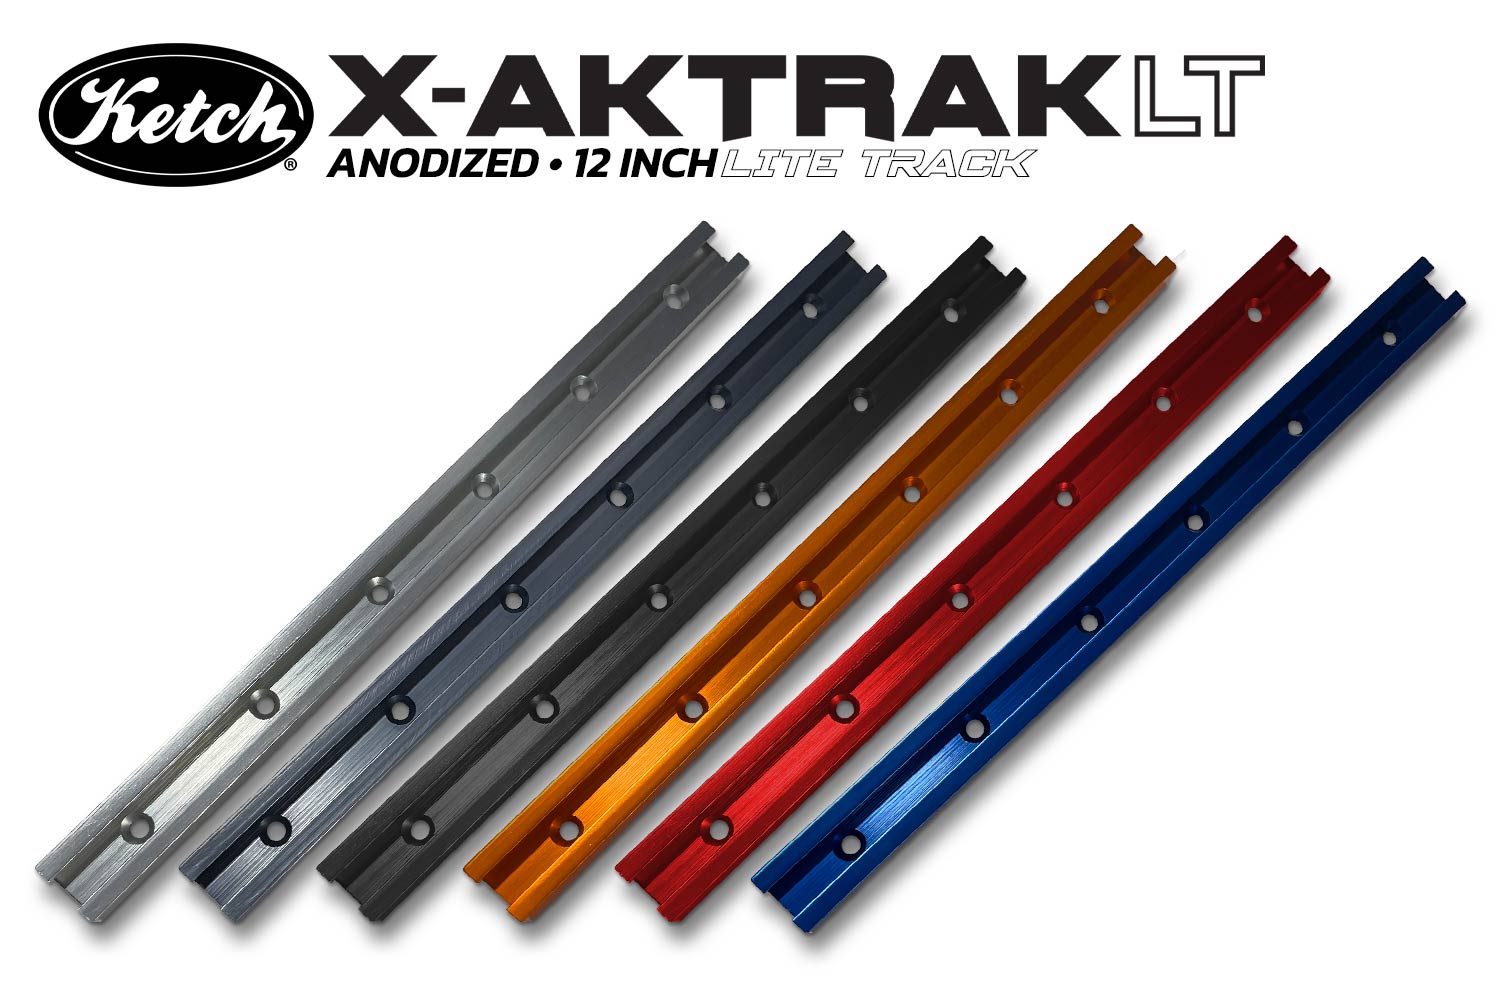 Aluminum anodized 12 inch X-Aktrak lite t-track accessory mounting solution for kayaks and other uses available in six colors.